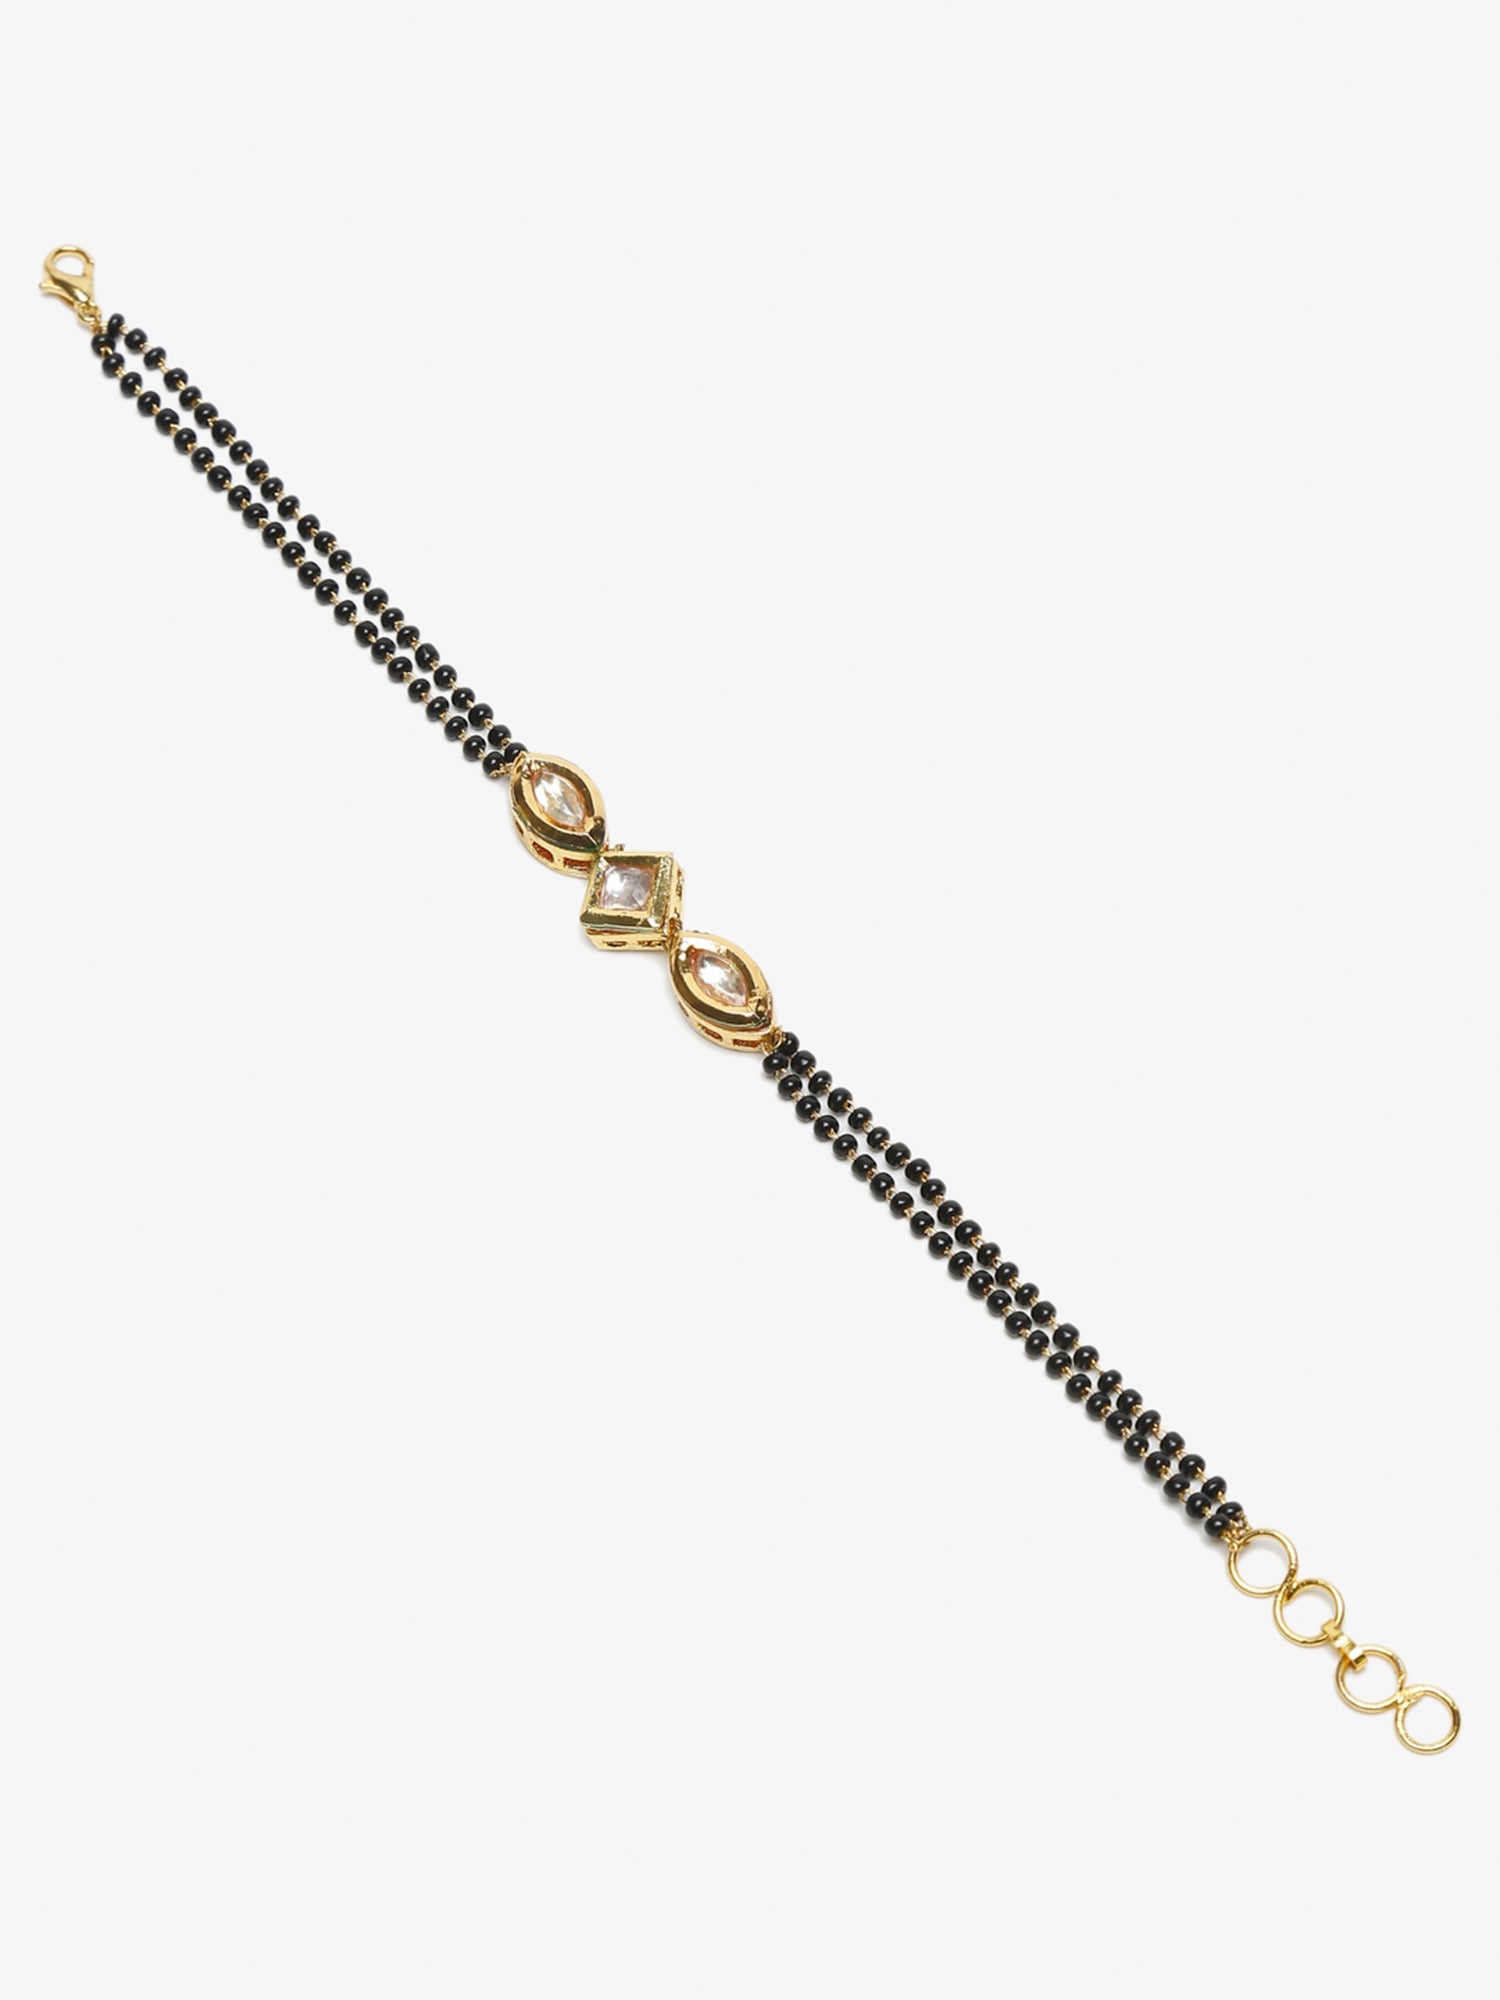 Buy quality 22KT/916 Yellow Gold rauni Mangalsutra Bracelet For Women in  Ahmedabad